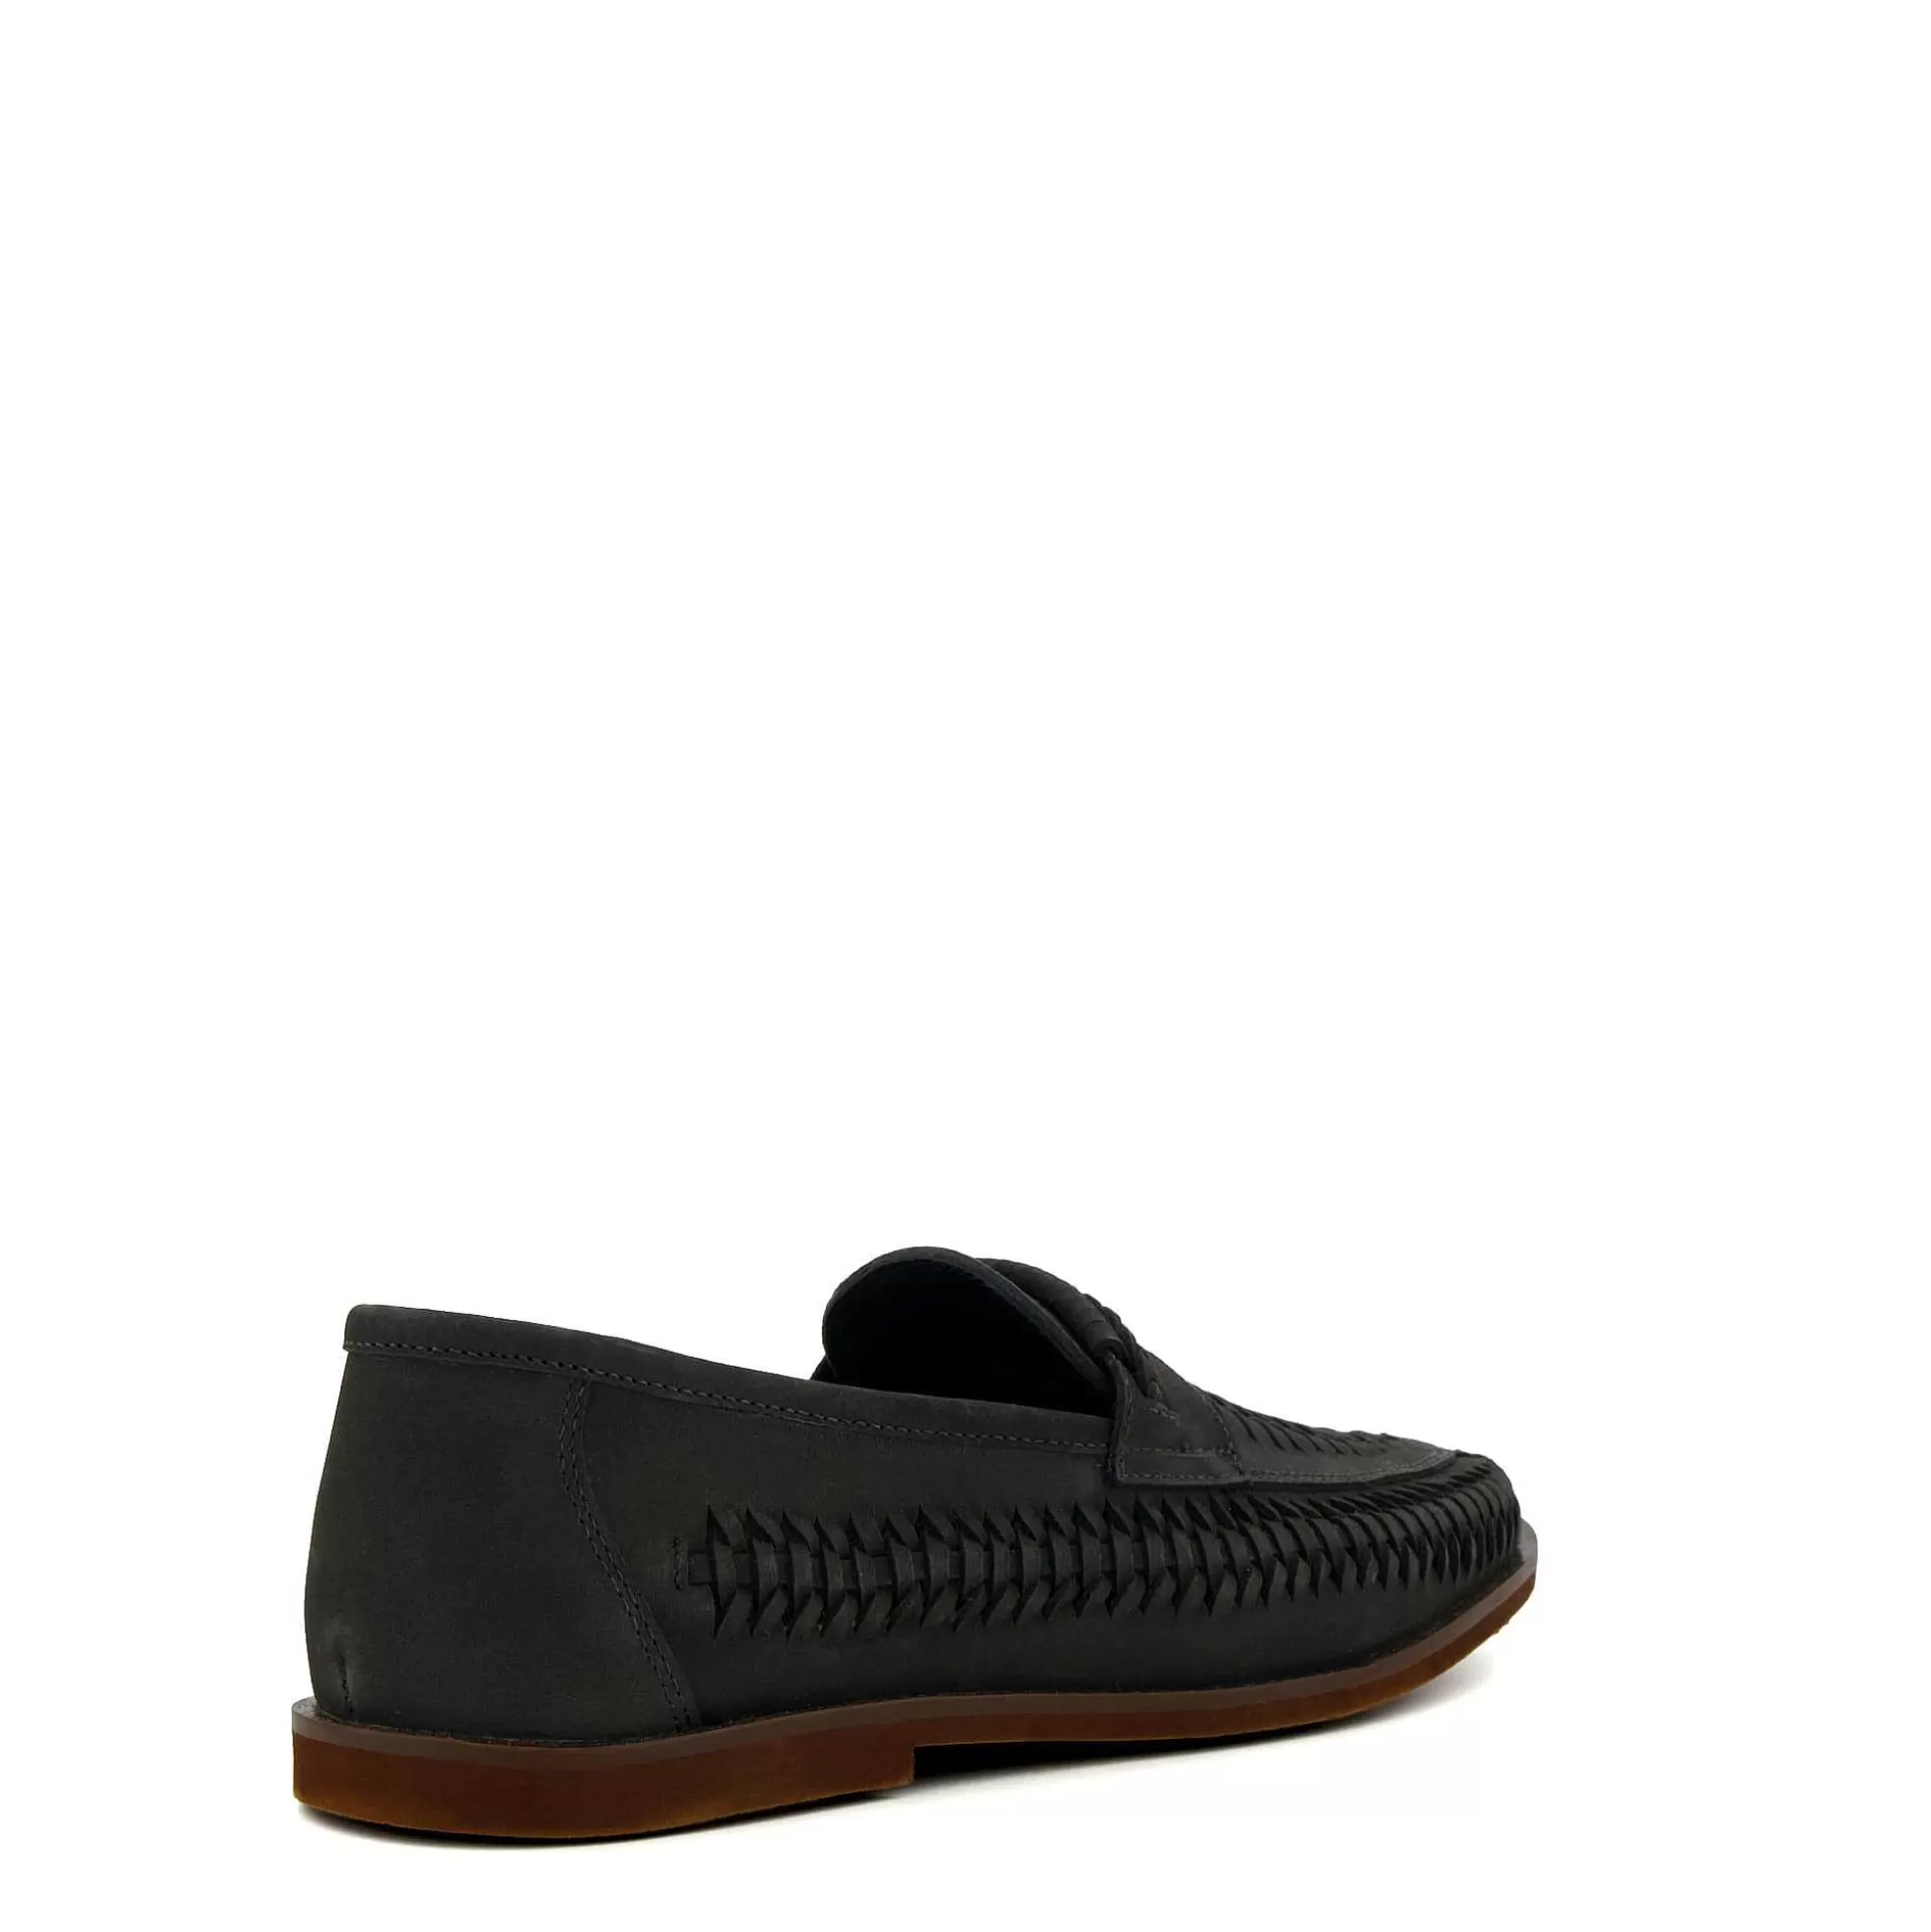 Dune London BRICKLES - DARK NAVY-Men Casual Shoes | Loafers